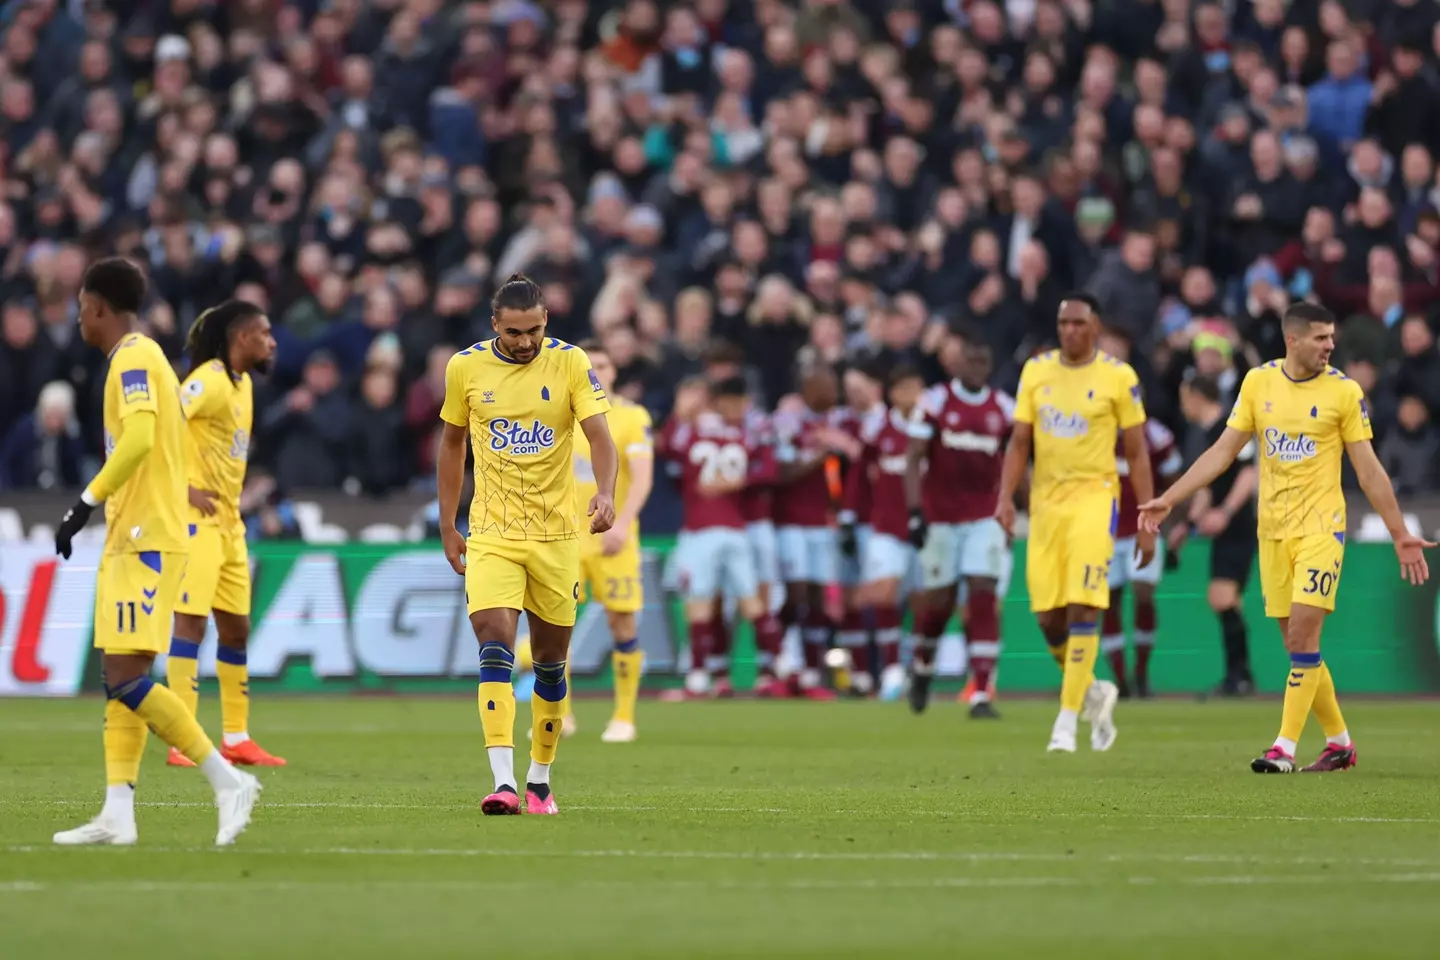 Everton's players during the West Ham game. (Image